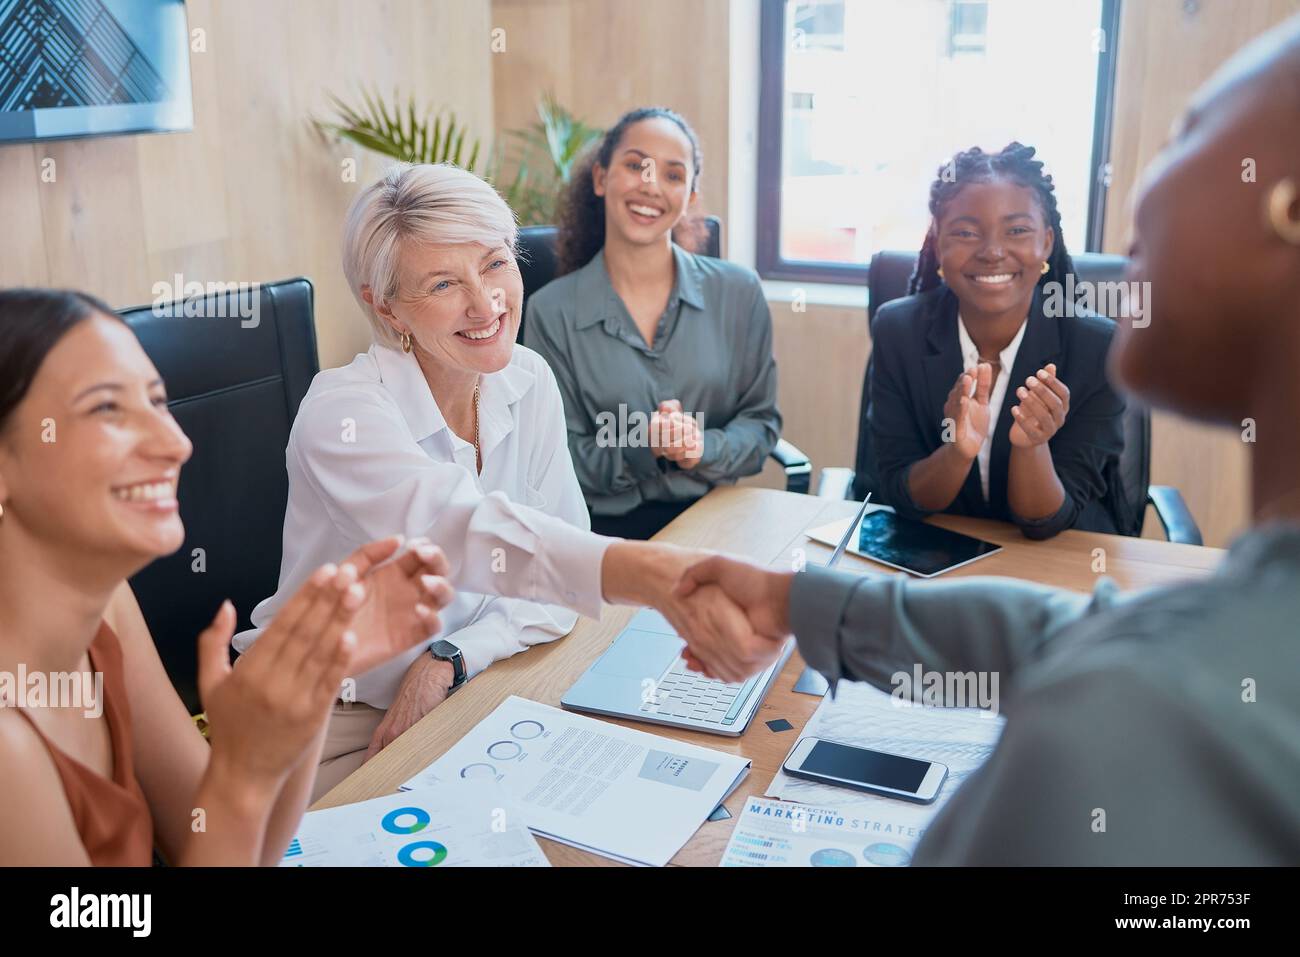 Handshake between business women. Two diverse colleagues shaking hands during a meeting in the boardroom. Congratulating her on a job well done while coworkers clap in acknowledgement of achievement Stock Photo